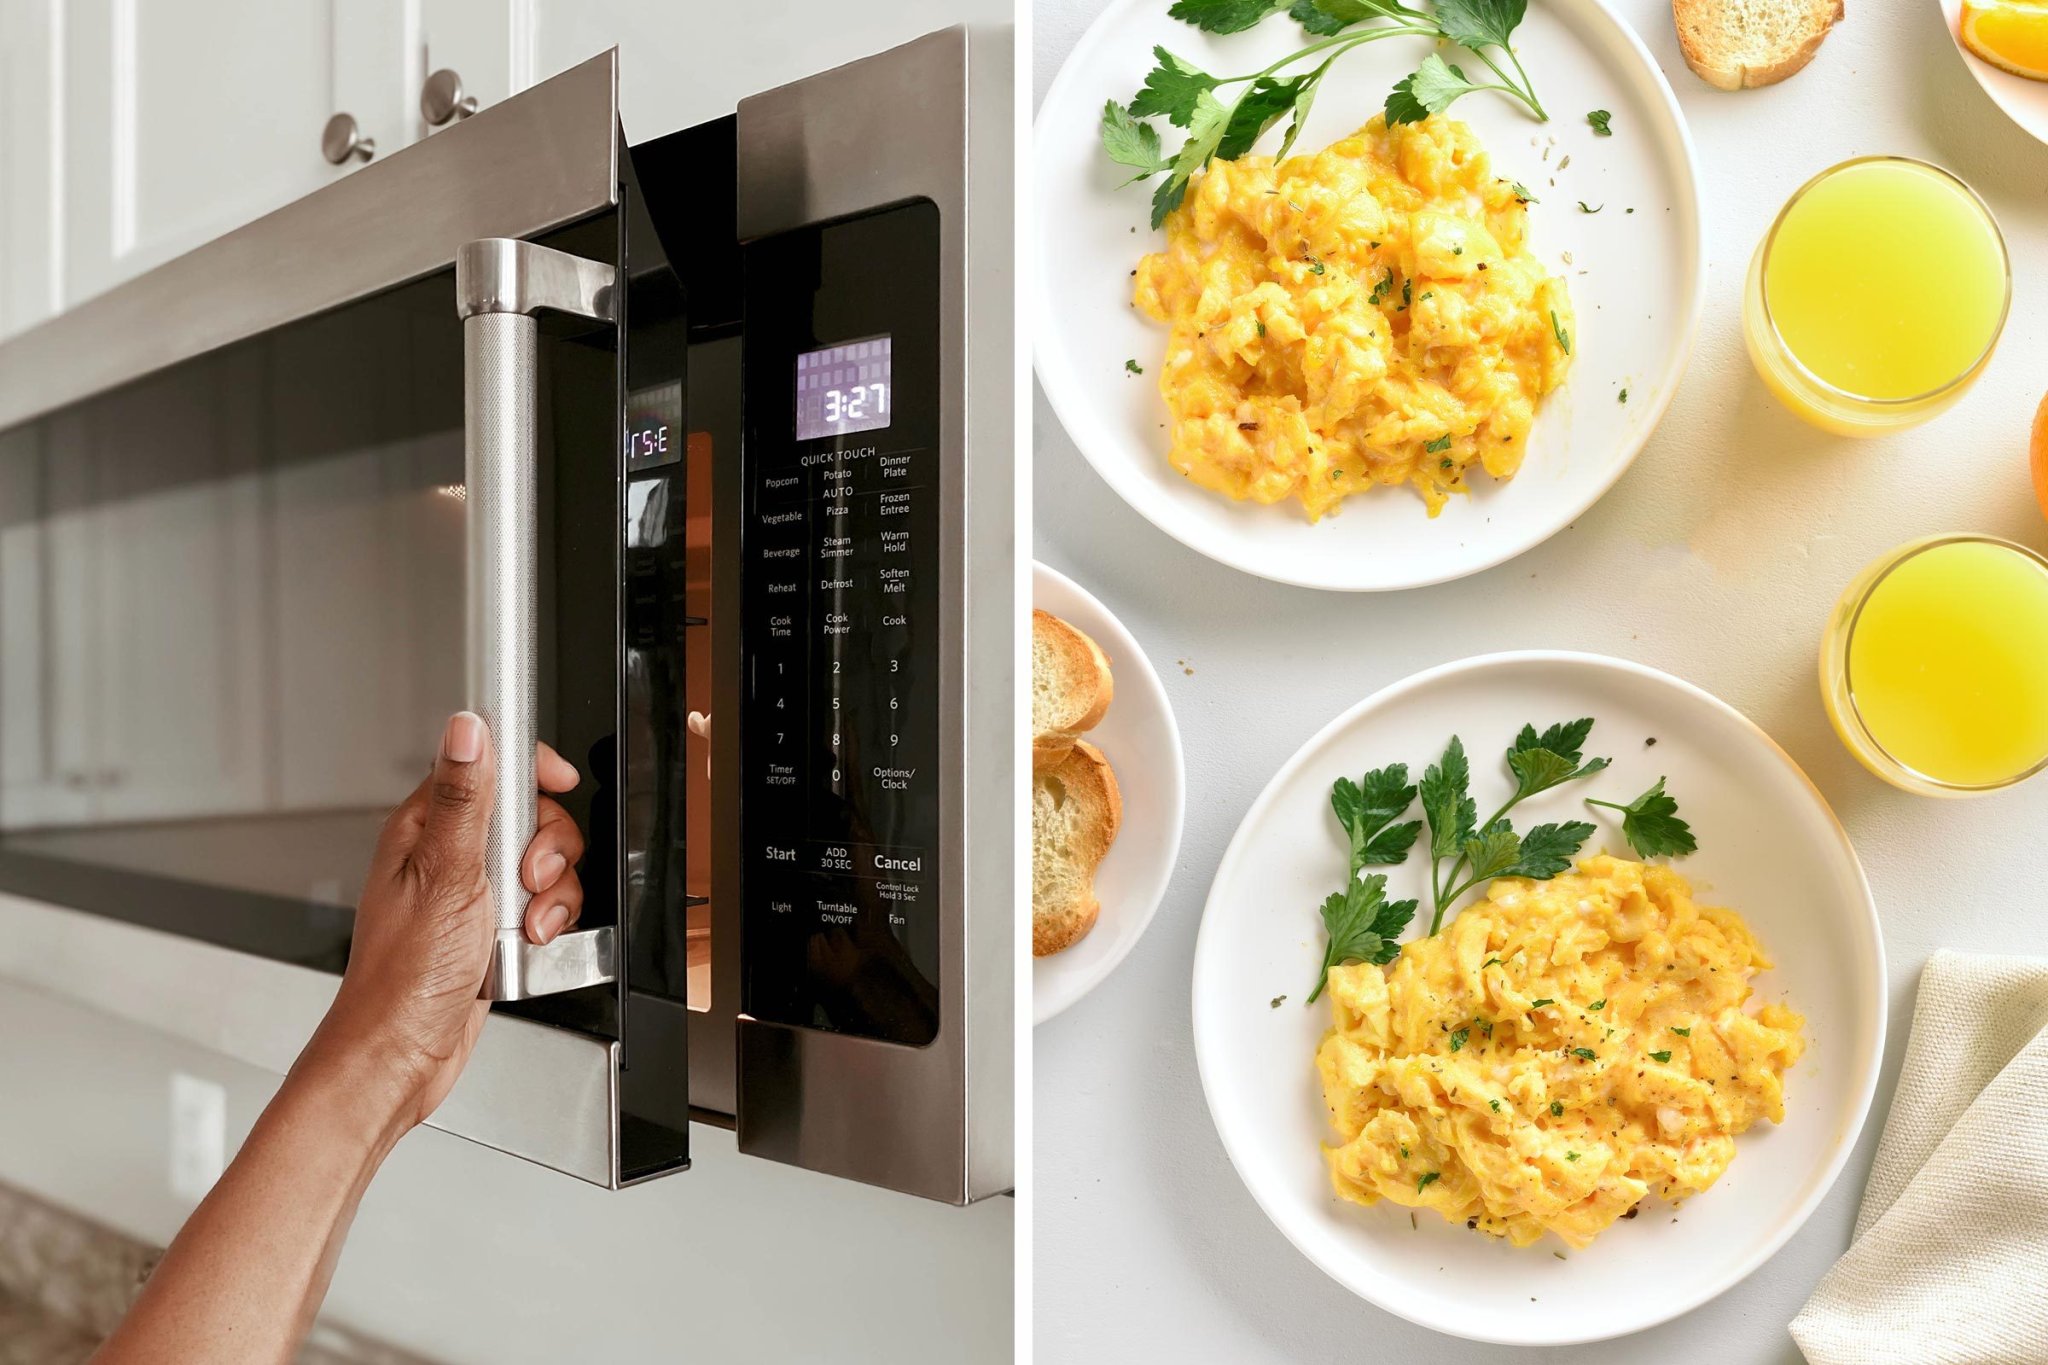 ﻿Can You Really Make Scrambled Eggs in the Microwave?